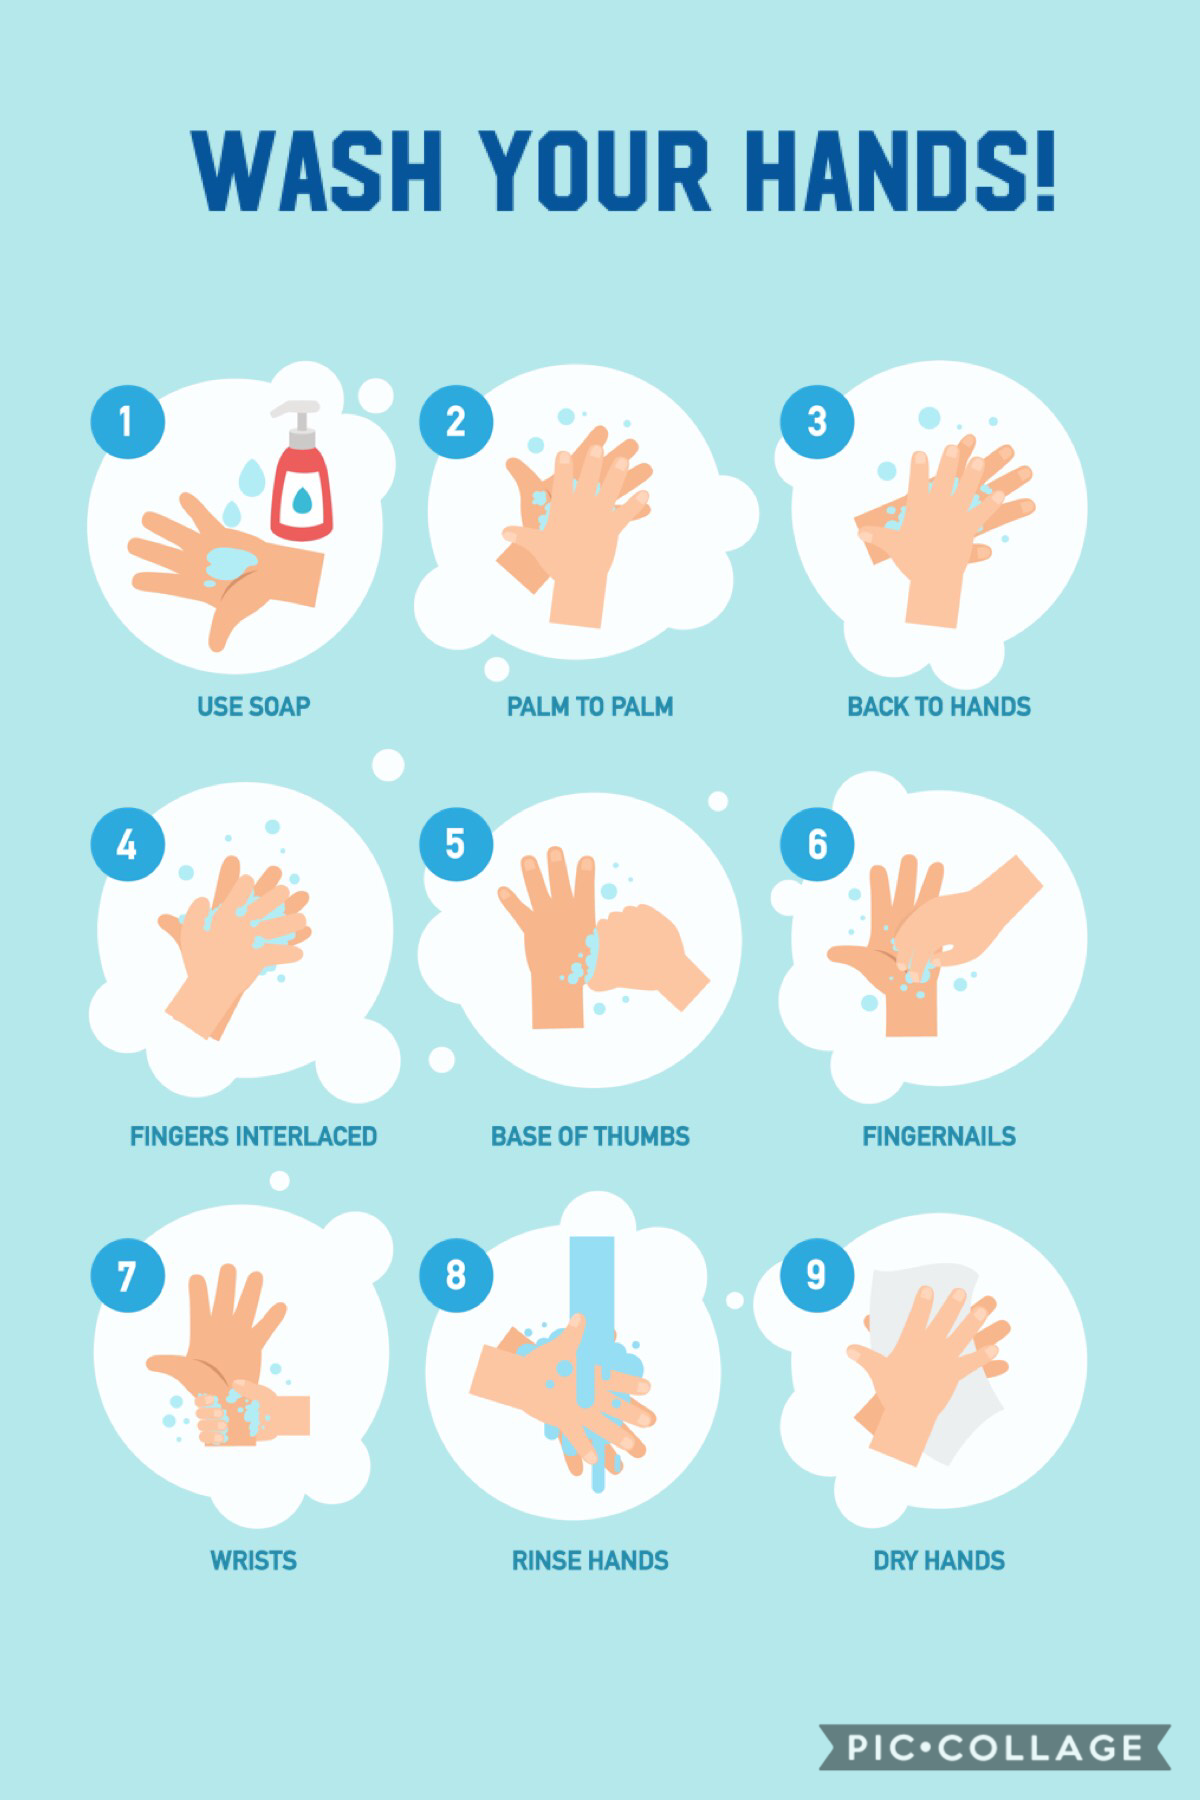 It is important that you wash 🧼 your hands 